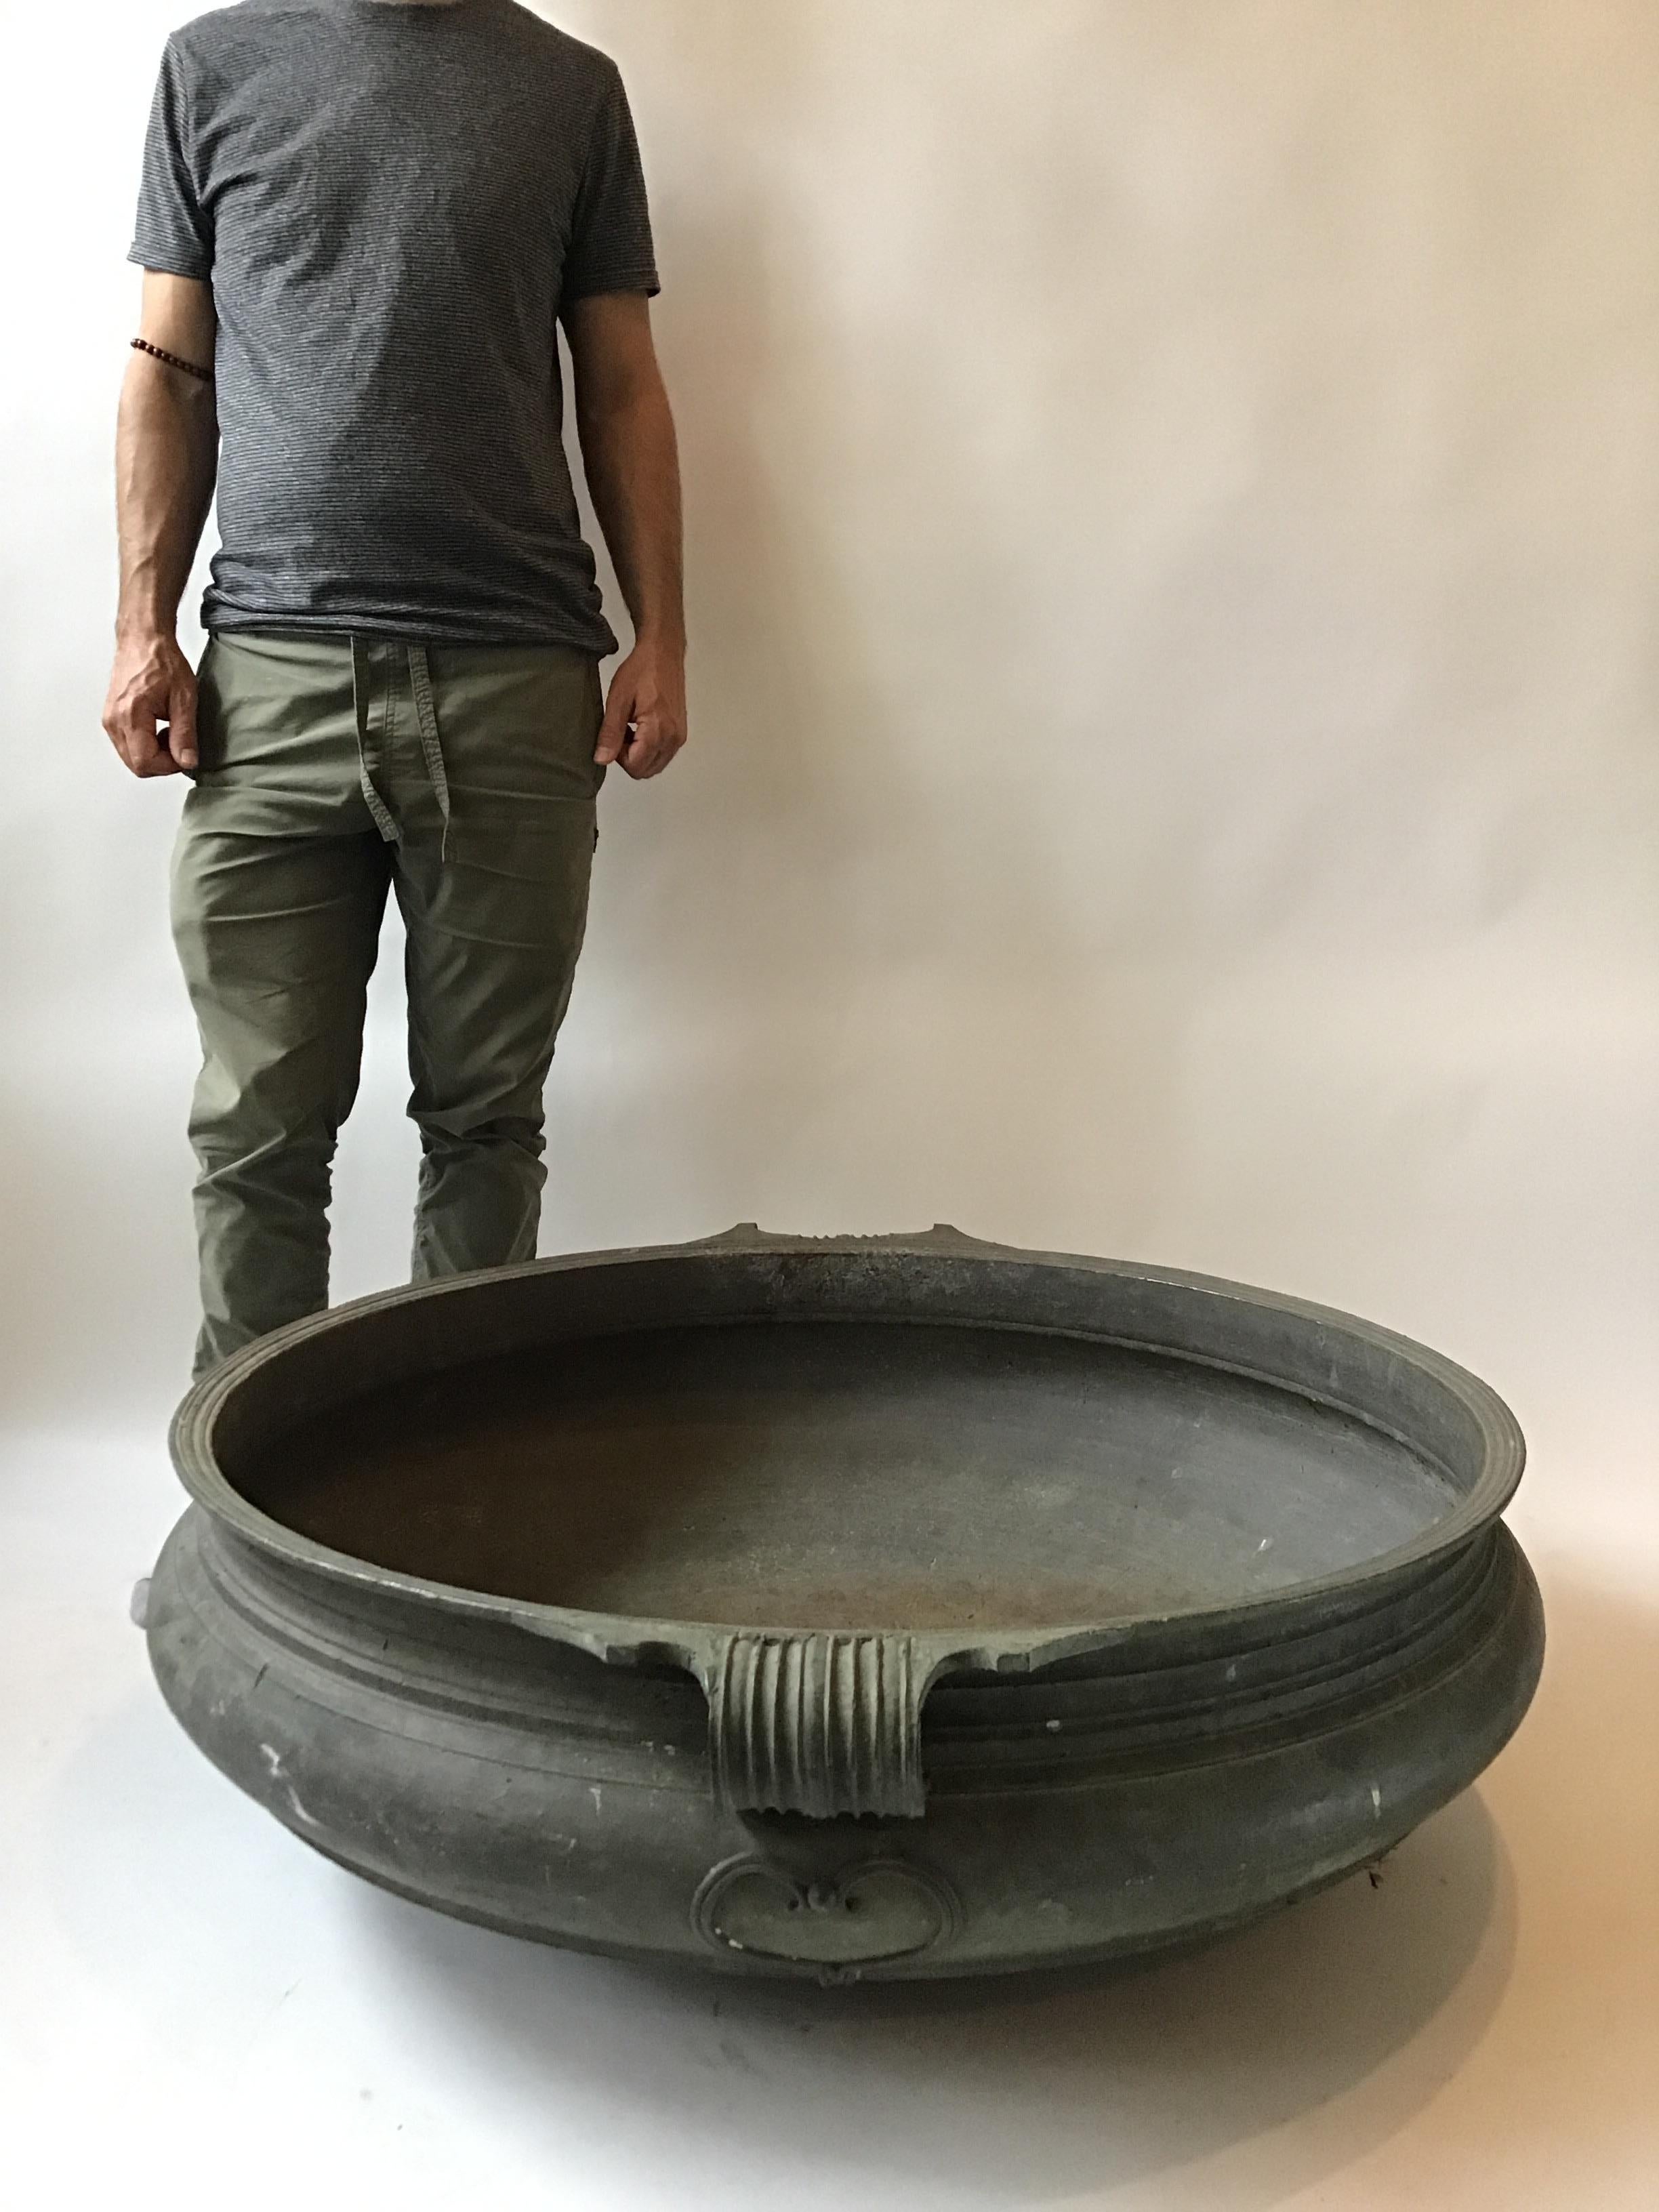 Large Asian Indian cast bronze Urli Temple bowl. This dish was a traditional container used for serving food in temples. Great now as a planter or centerpiece on a table. Cracks in bowl as seen in image 5 and 6.